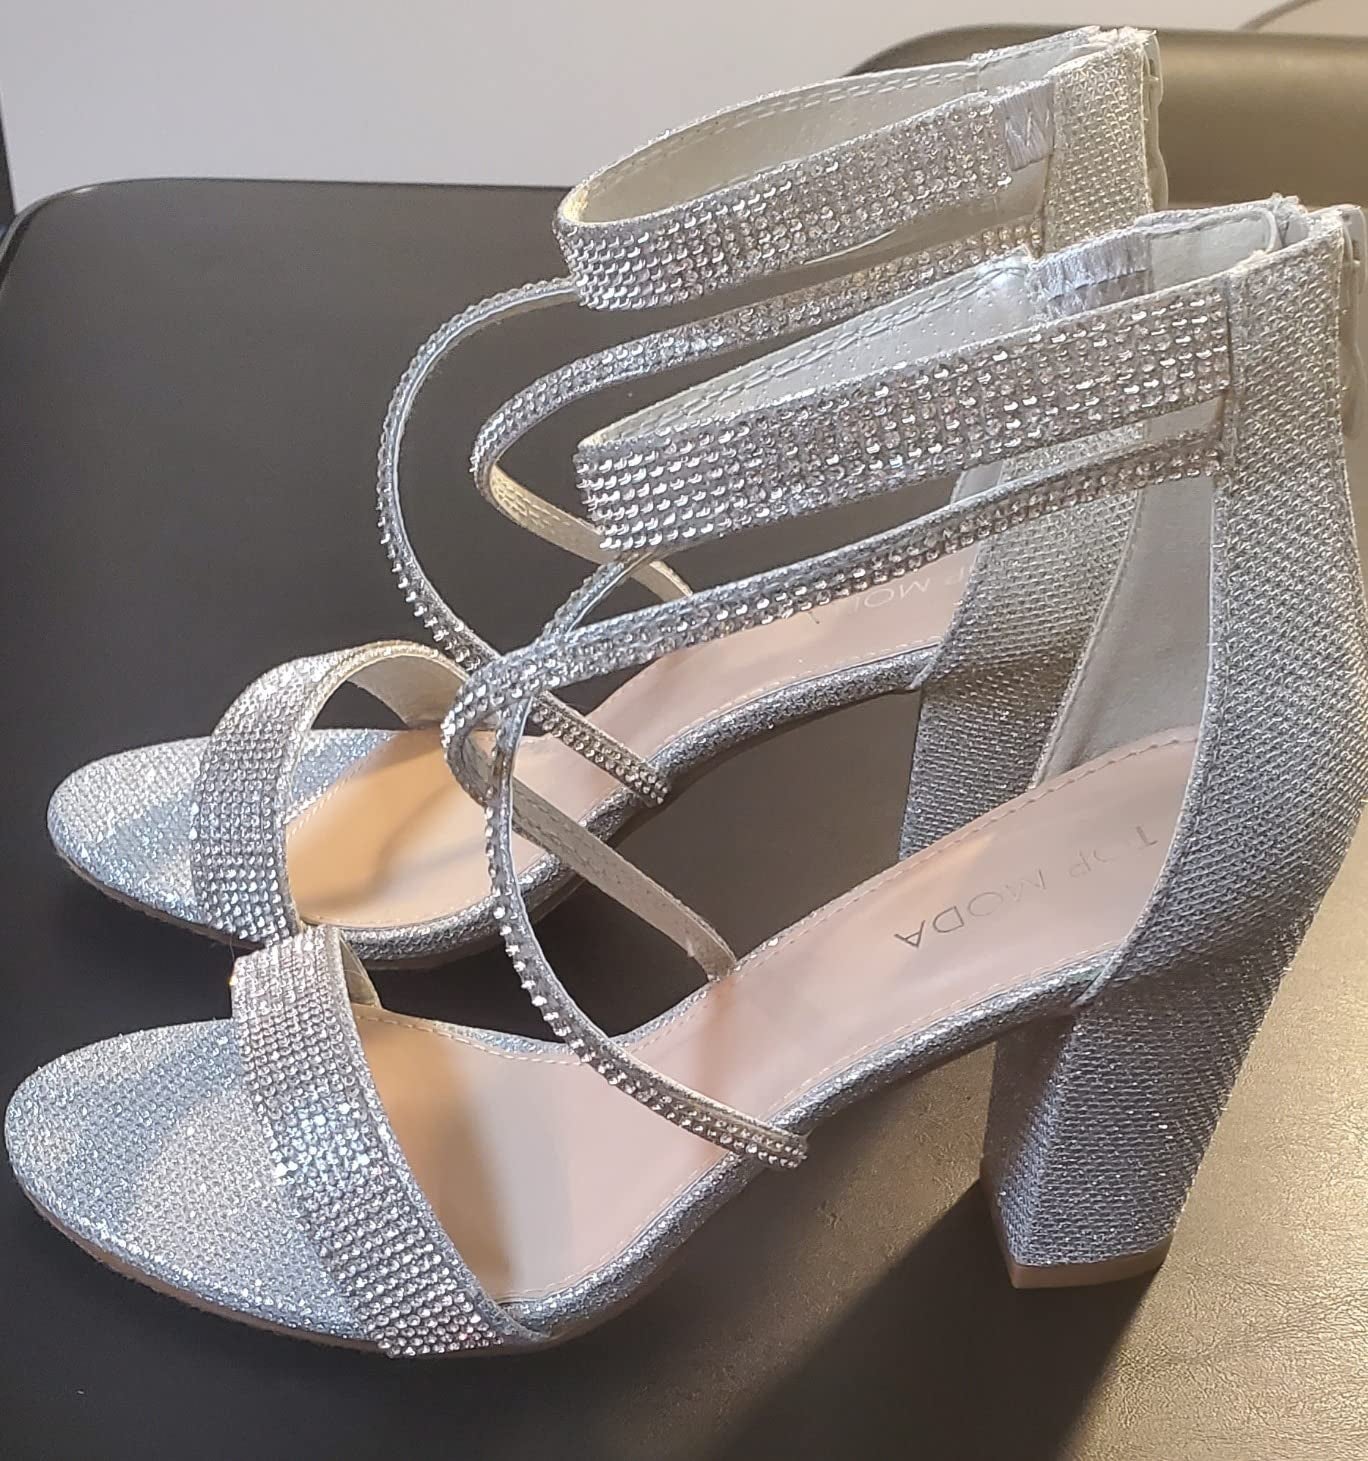 32 Comfortable Heels That Reviewers Swear By